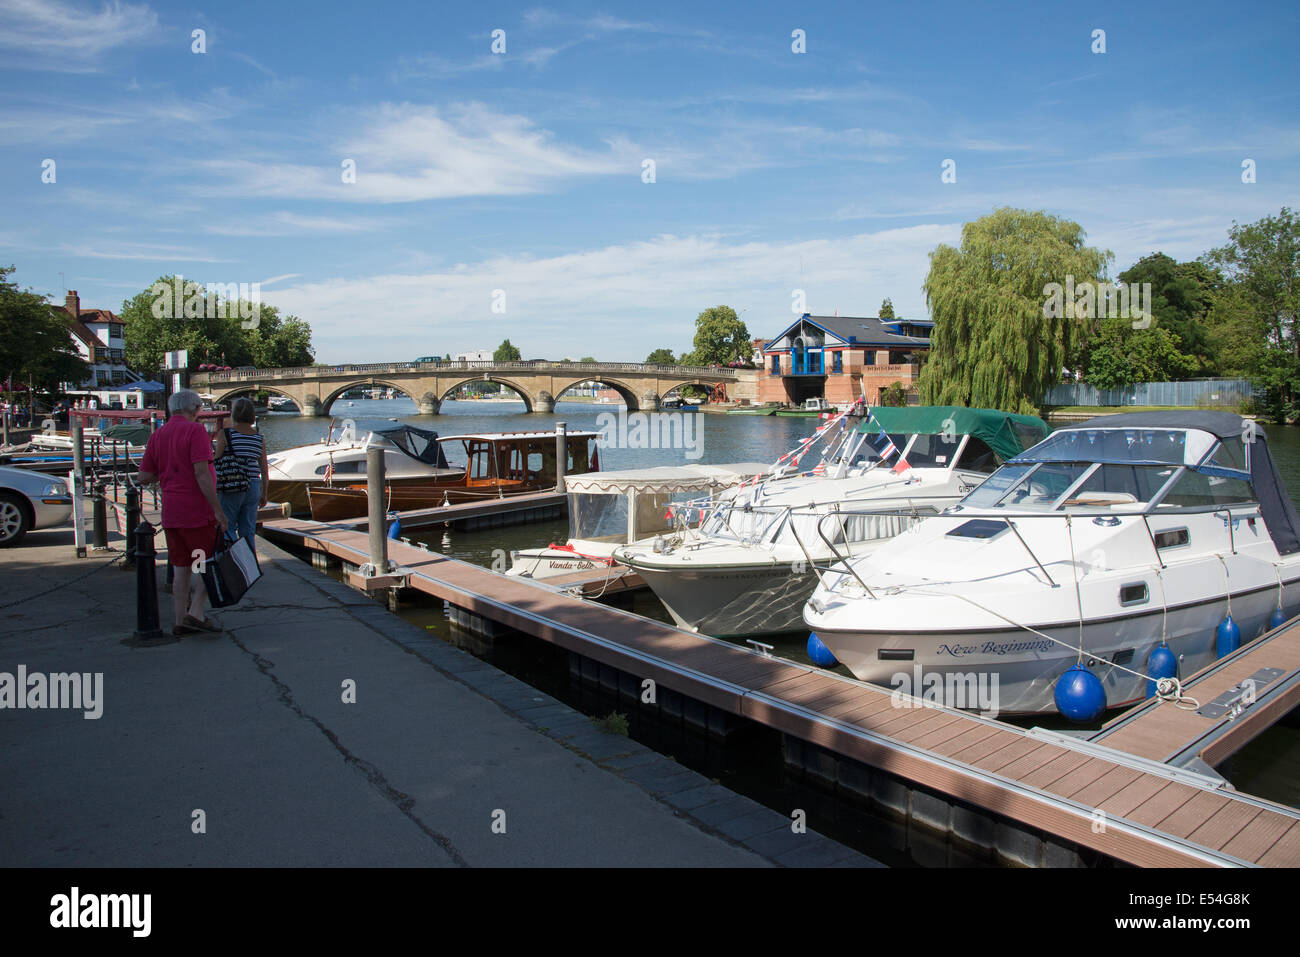 River Thames at Henley on Thames Oxfordshire UK Boat hire Stock Photo